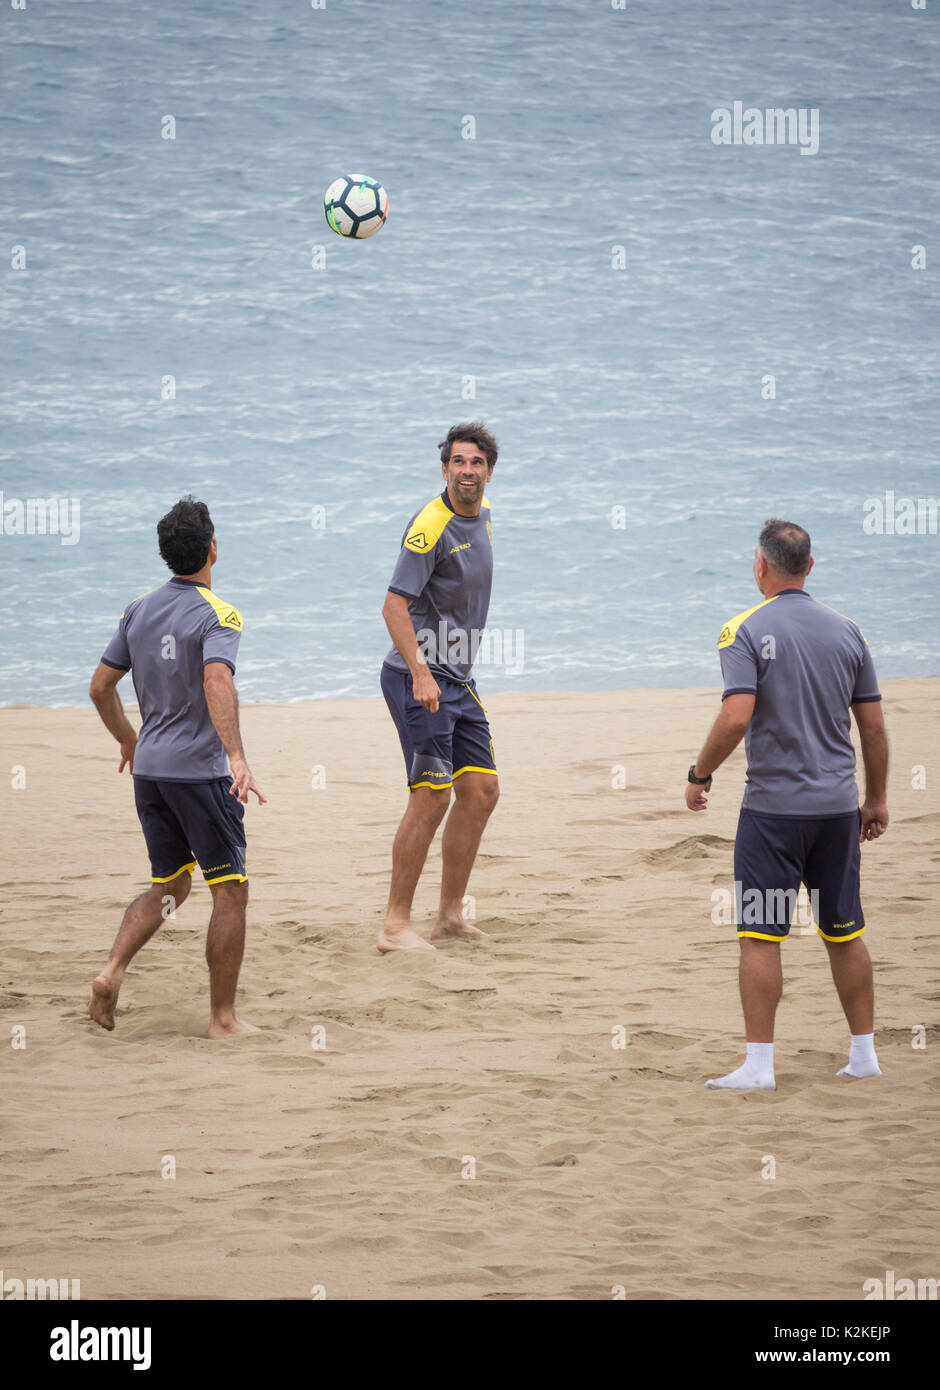 Las Palmas, Gran Canaria, Canary Islands, Spain. 31st August, 2017. With Chelsea striker Loic Remy rumoured to be close to signing for Spanish La Liga team, Las Palmas, the Las Palmas players have a morning training session on one of the city beaches in Las Palmas, the capital of Gran Canaria. UK press reporting that Diego Costa could also be heading to Las Palmas on a four month loan while he waits to re-join Atletico Madrid permanently when their transfer ban gets lifted in January. Credit: ALAN DAWSON/Alamy Live News Stock Photo